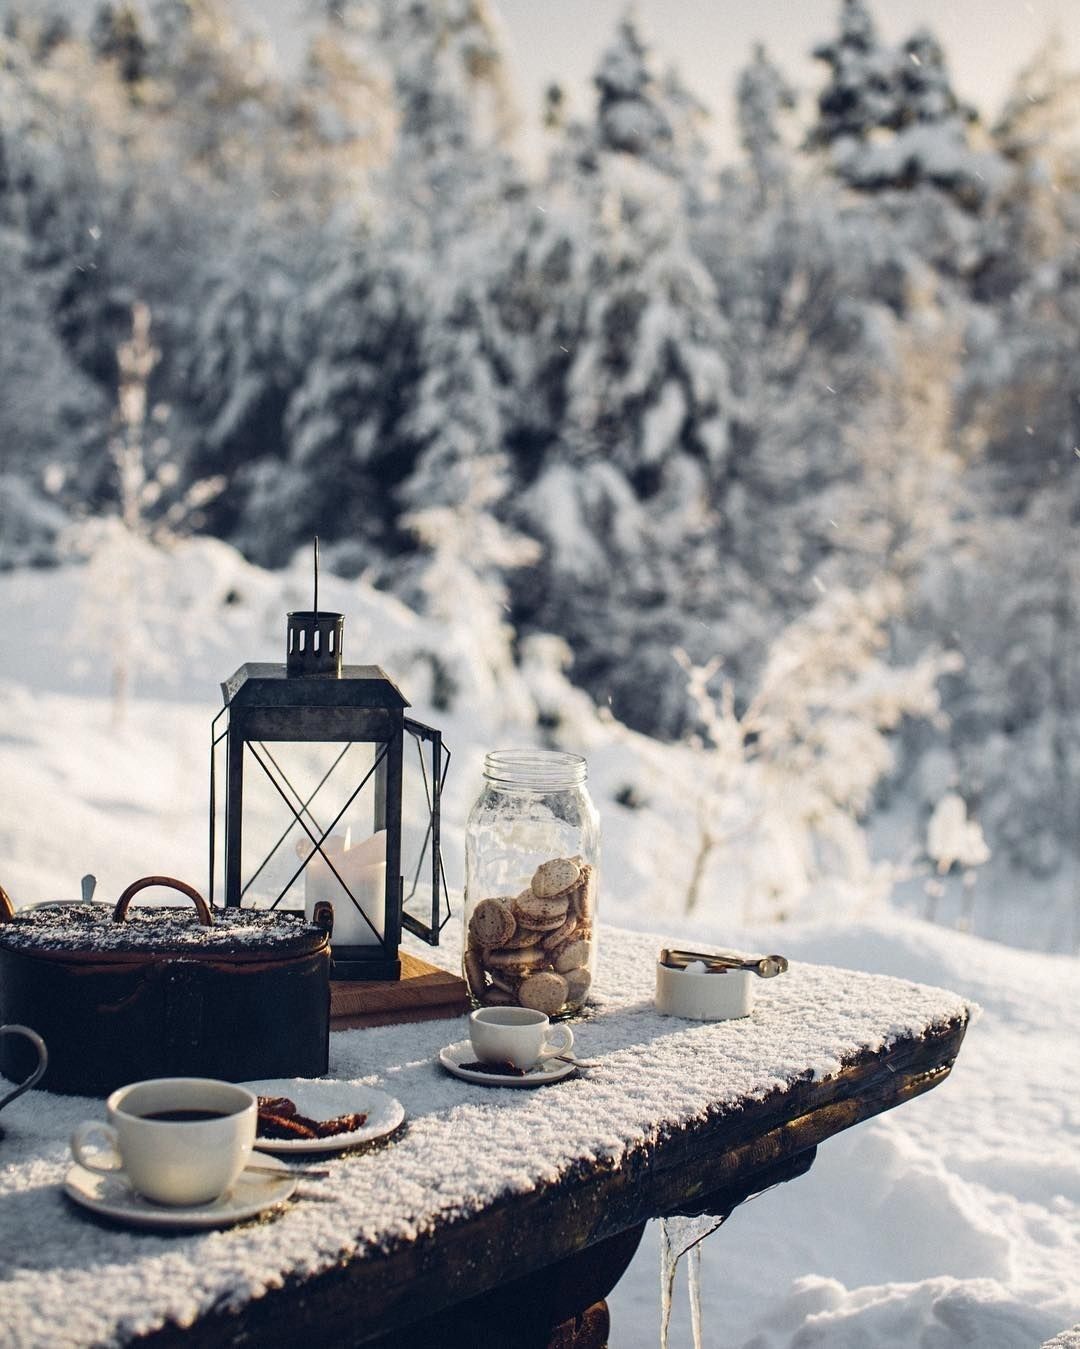 A snowy picnic table with a lantern, cookies, and a cup of tea. - Winter